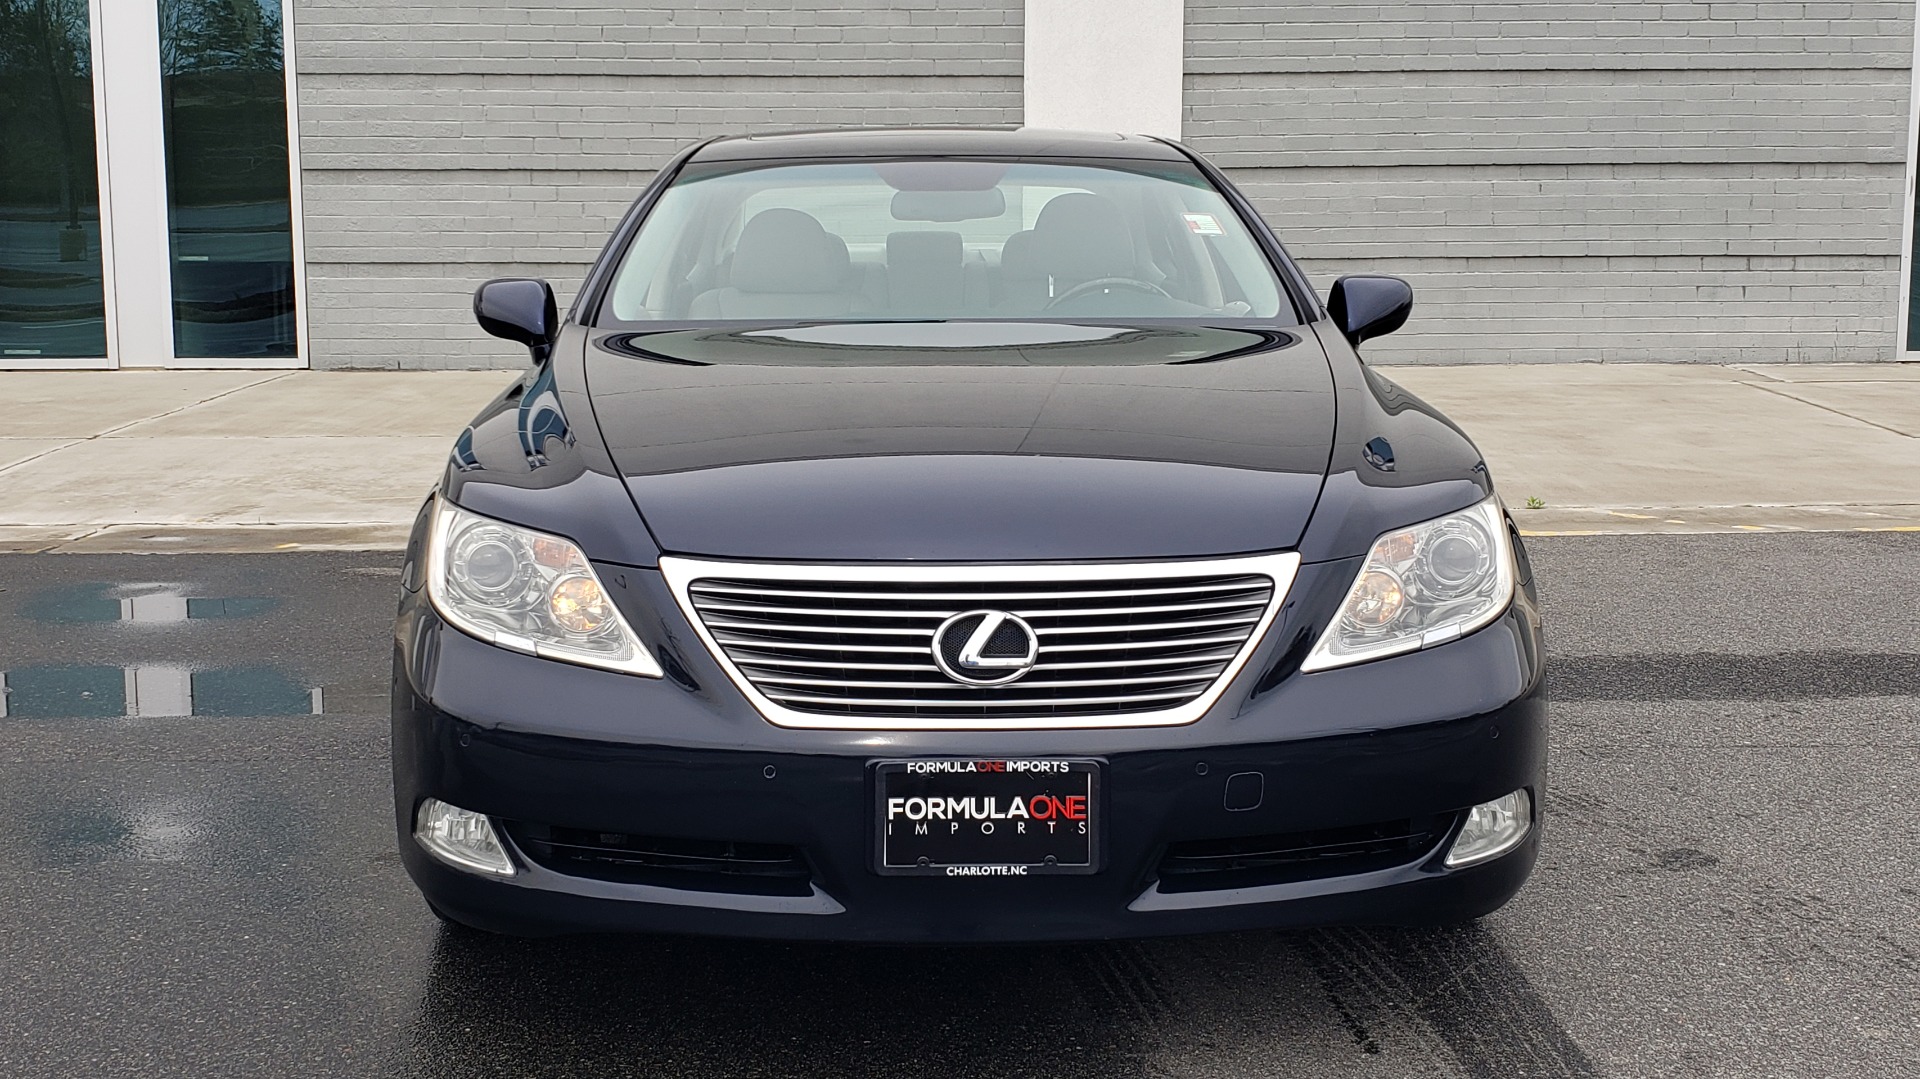 Used 2008 Lexus LS 460 LWB LUXURY SEDAN / MARK LEVINSON / INT PARK ASST / REARVIEW for sale Sold at Formula Imports in Charlotte NC 28227 16